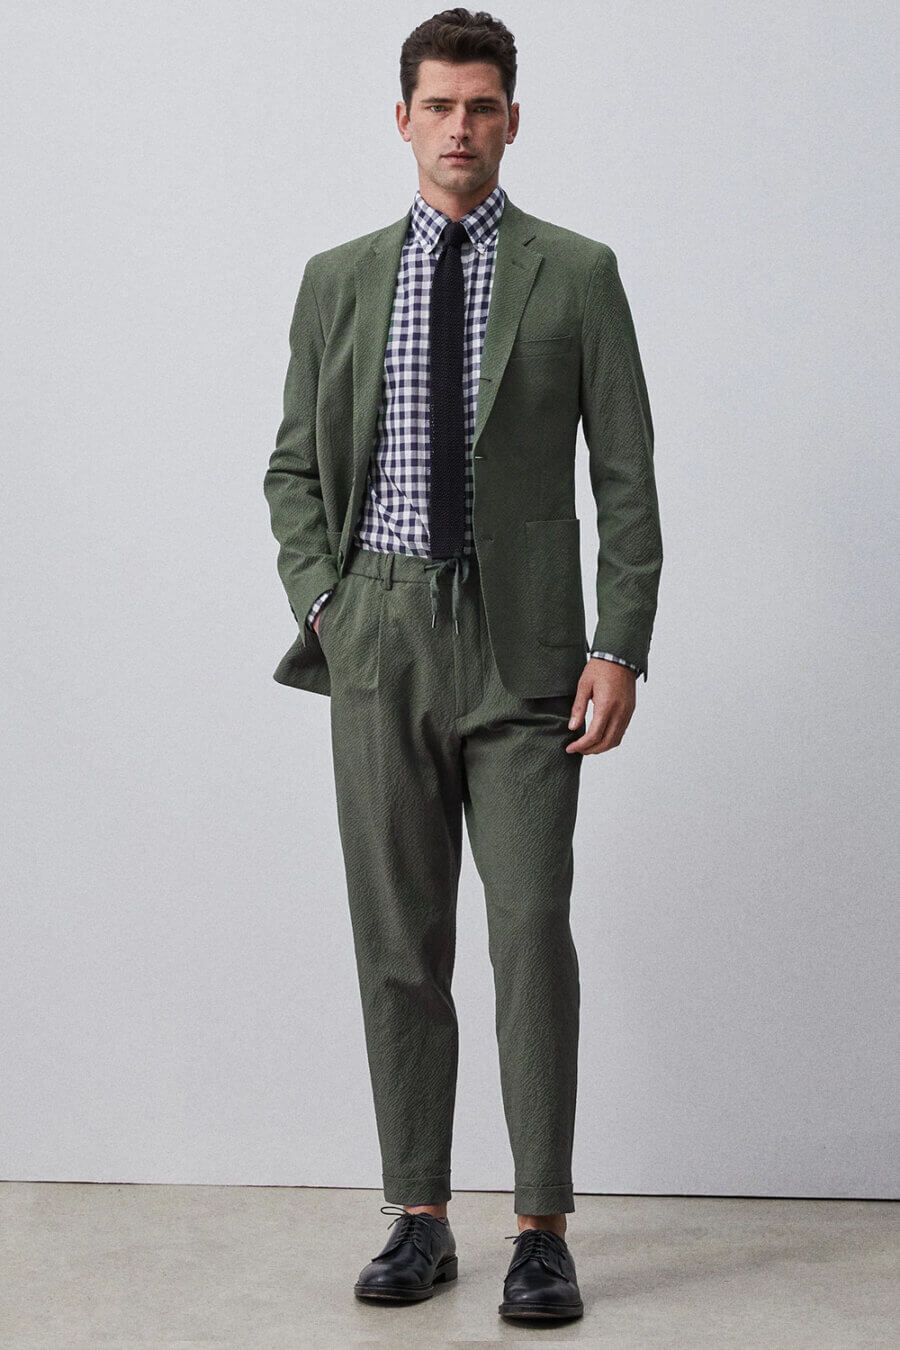 Men's green suit worn with black shoes